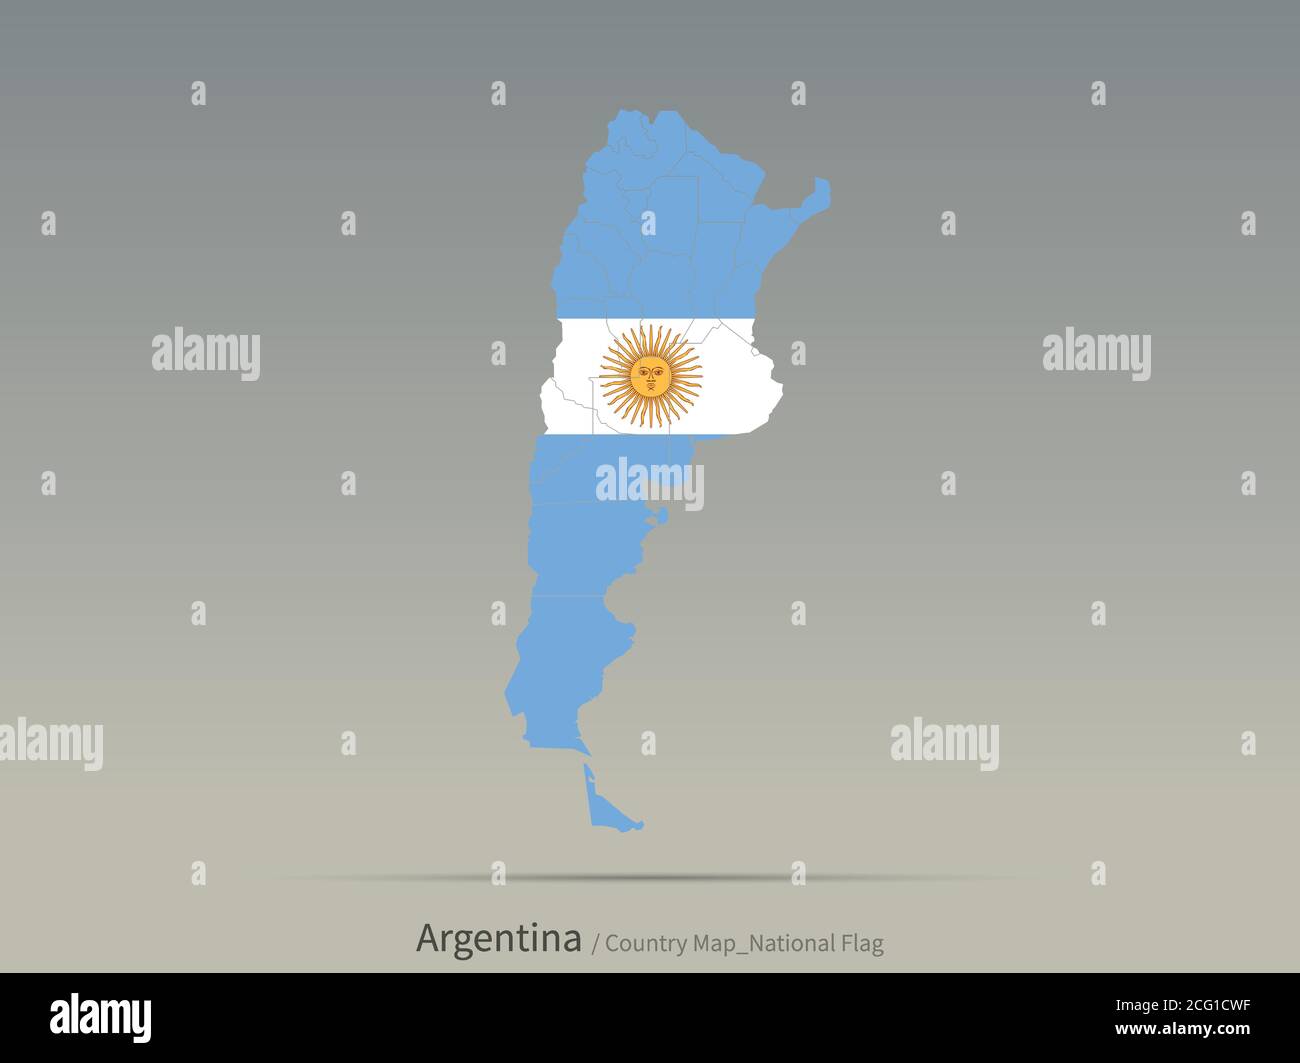 Argentina Flag Isolated on Map. South american countries map and flag. Stock Vector